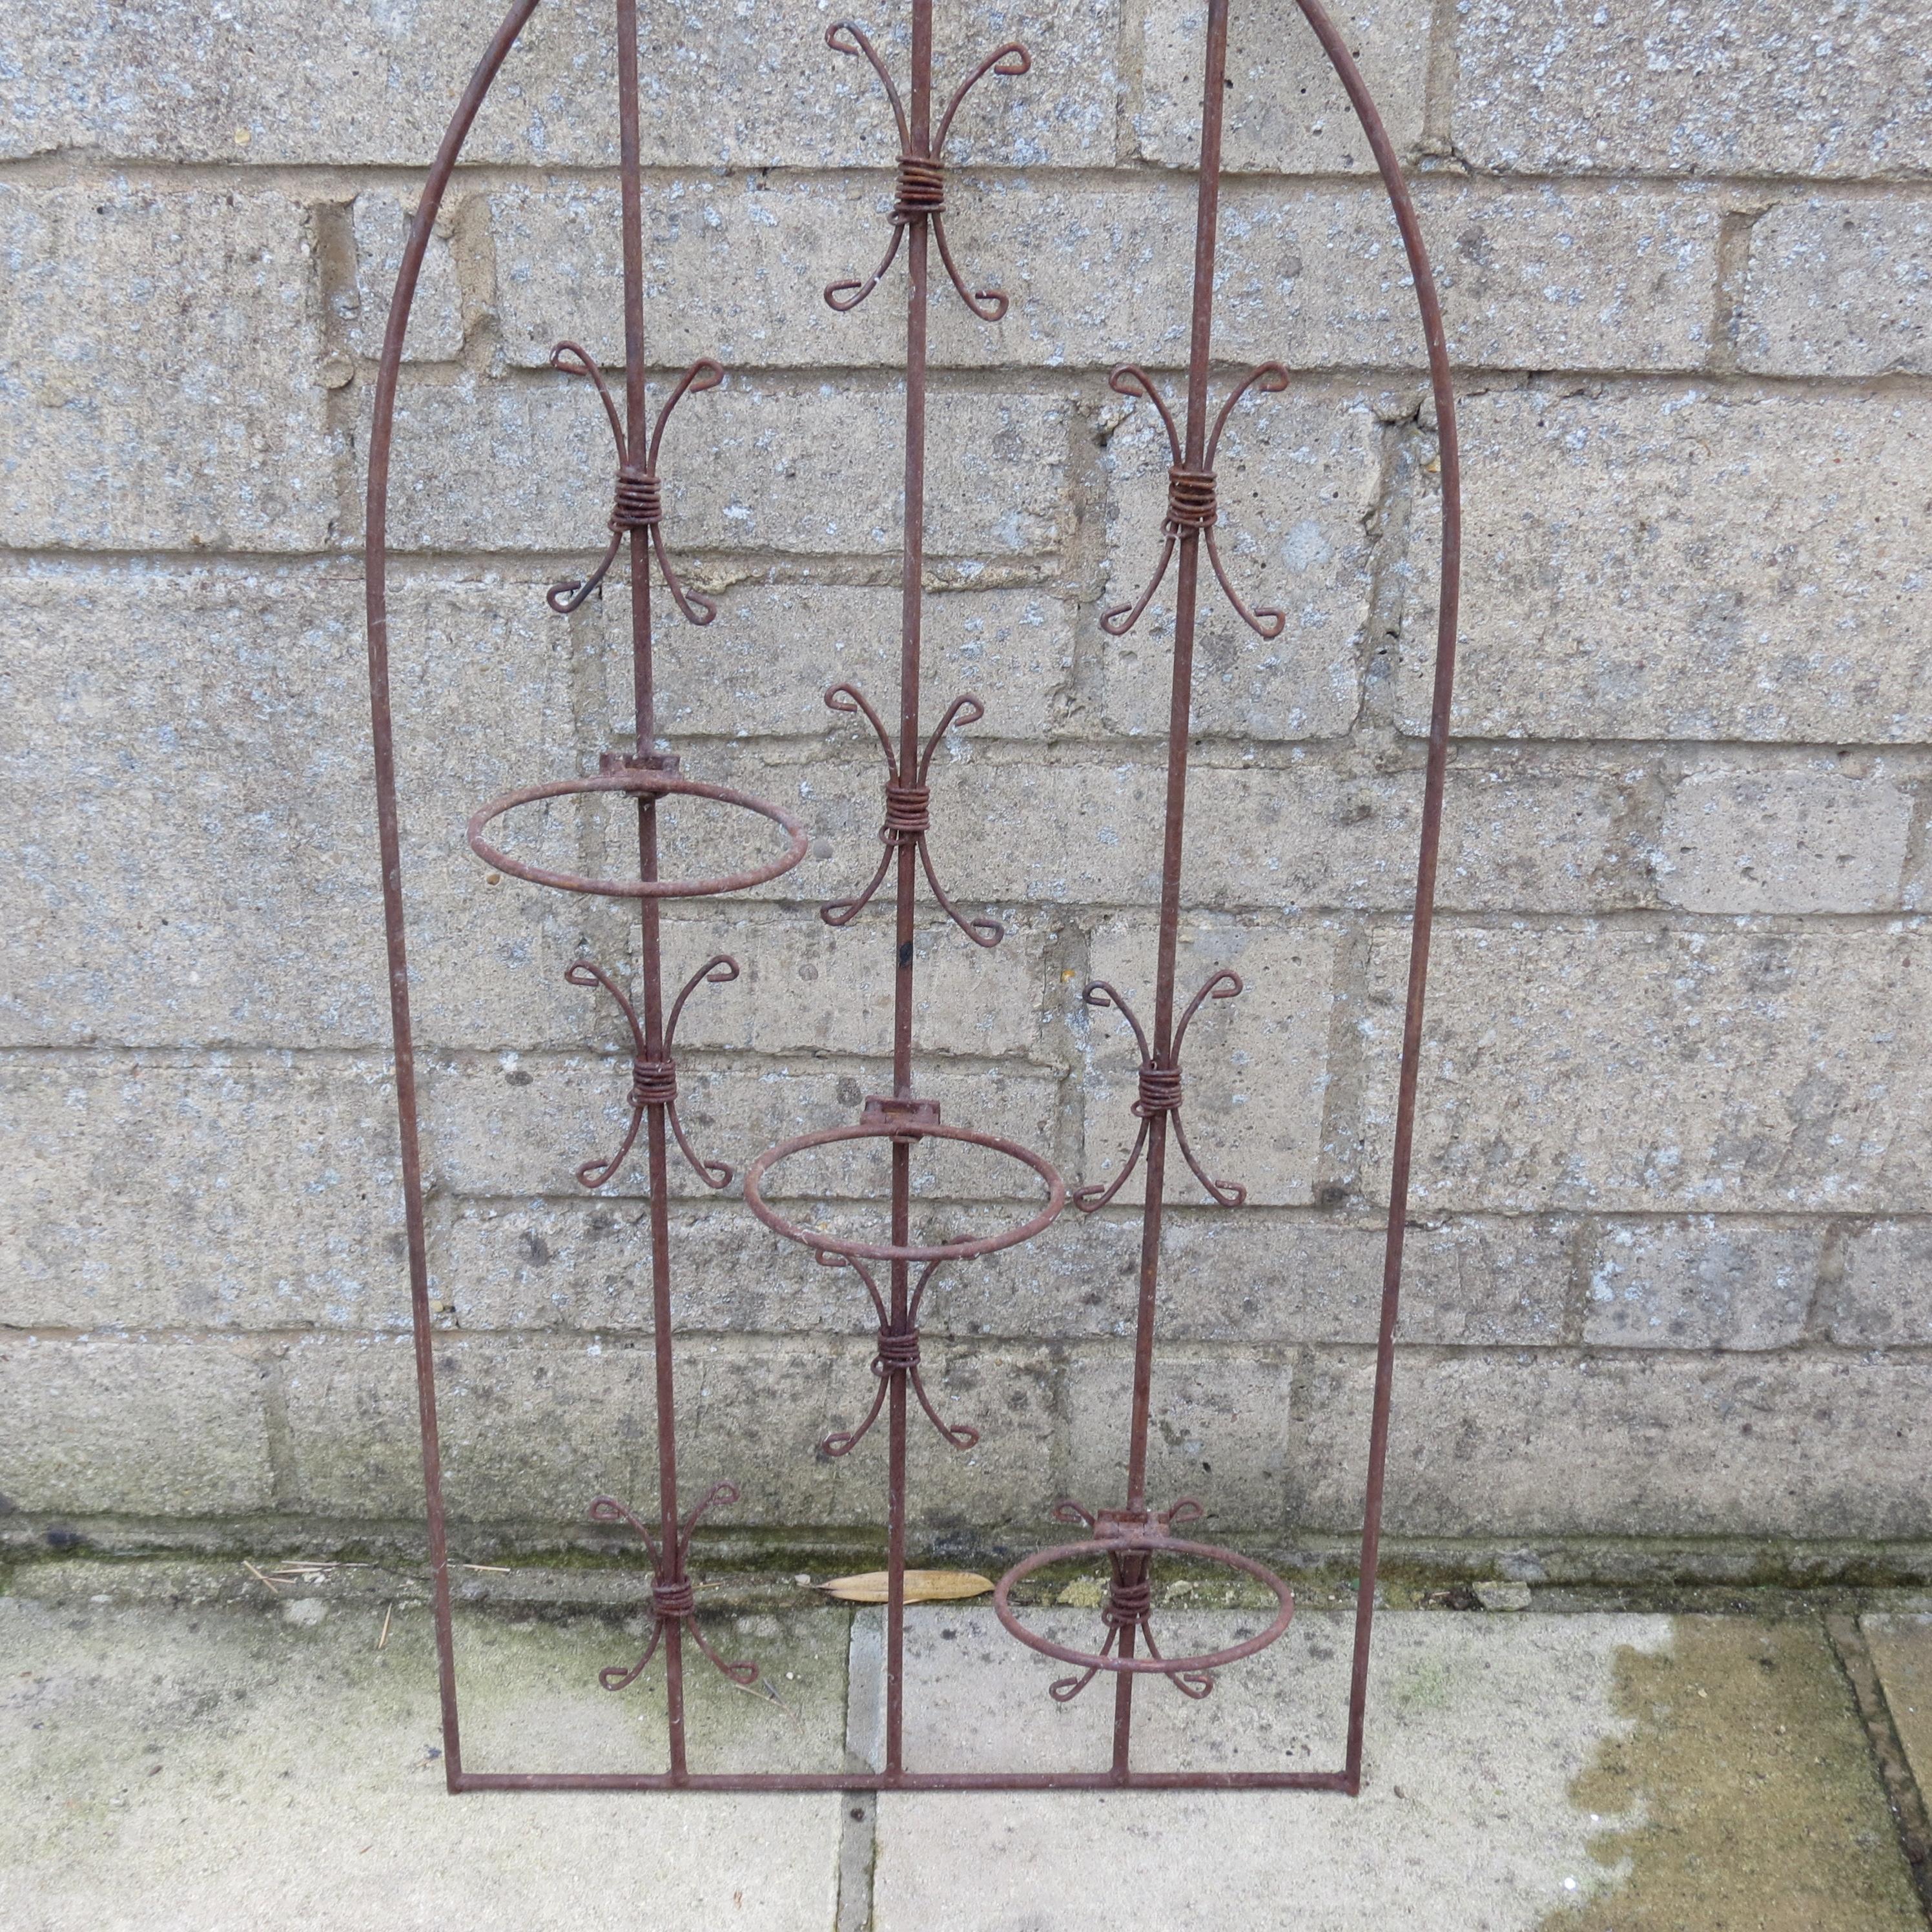 20th Century Vintage Decorative Metal Wall Hanging Planter 2 Available